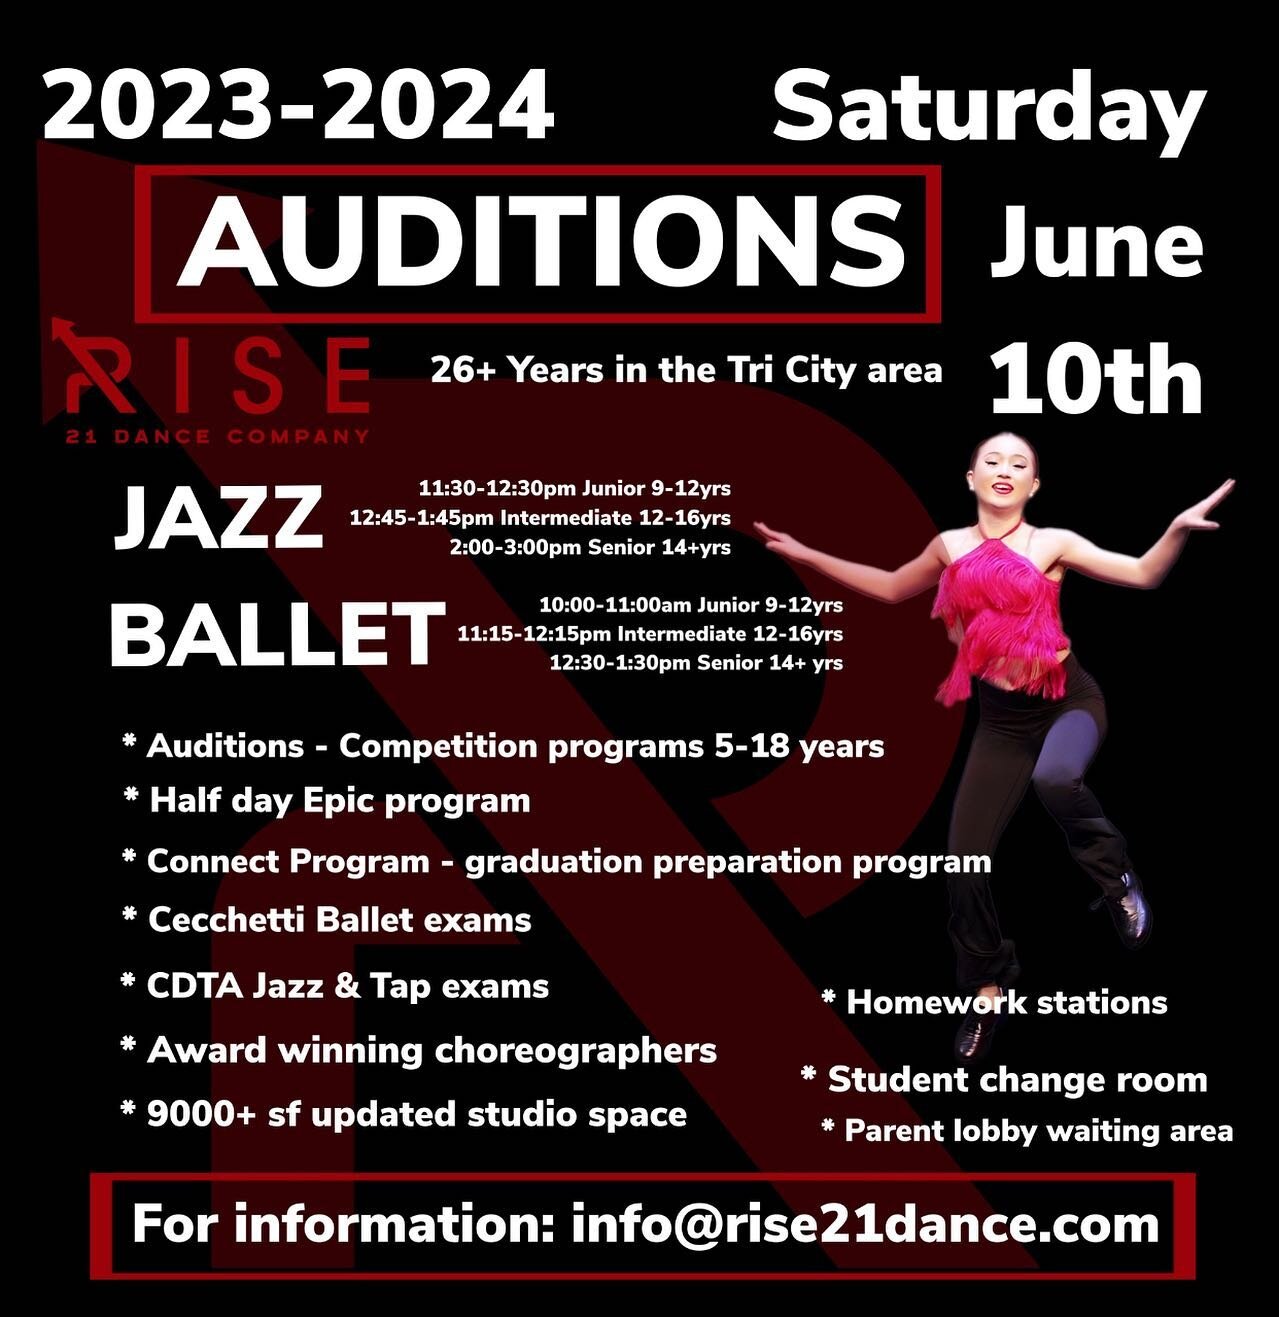 Join the Rise21 Dance Company Family.  2023/24 Auditions will take place Saturday, June 10th.  For more info please email info@rise21dance.com or click the link to register. #newseason #letsgo